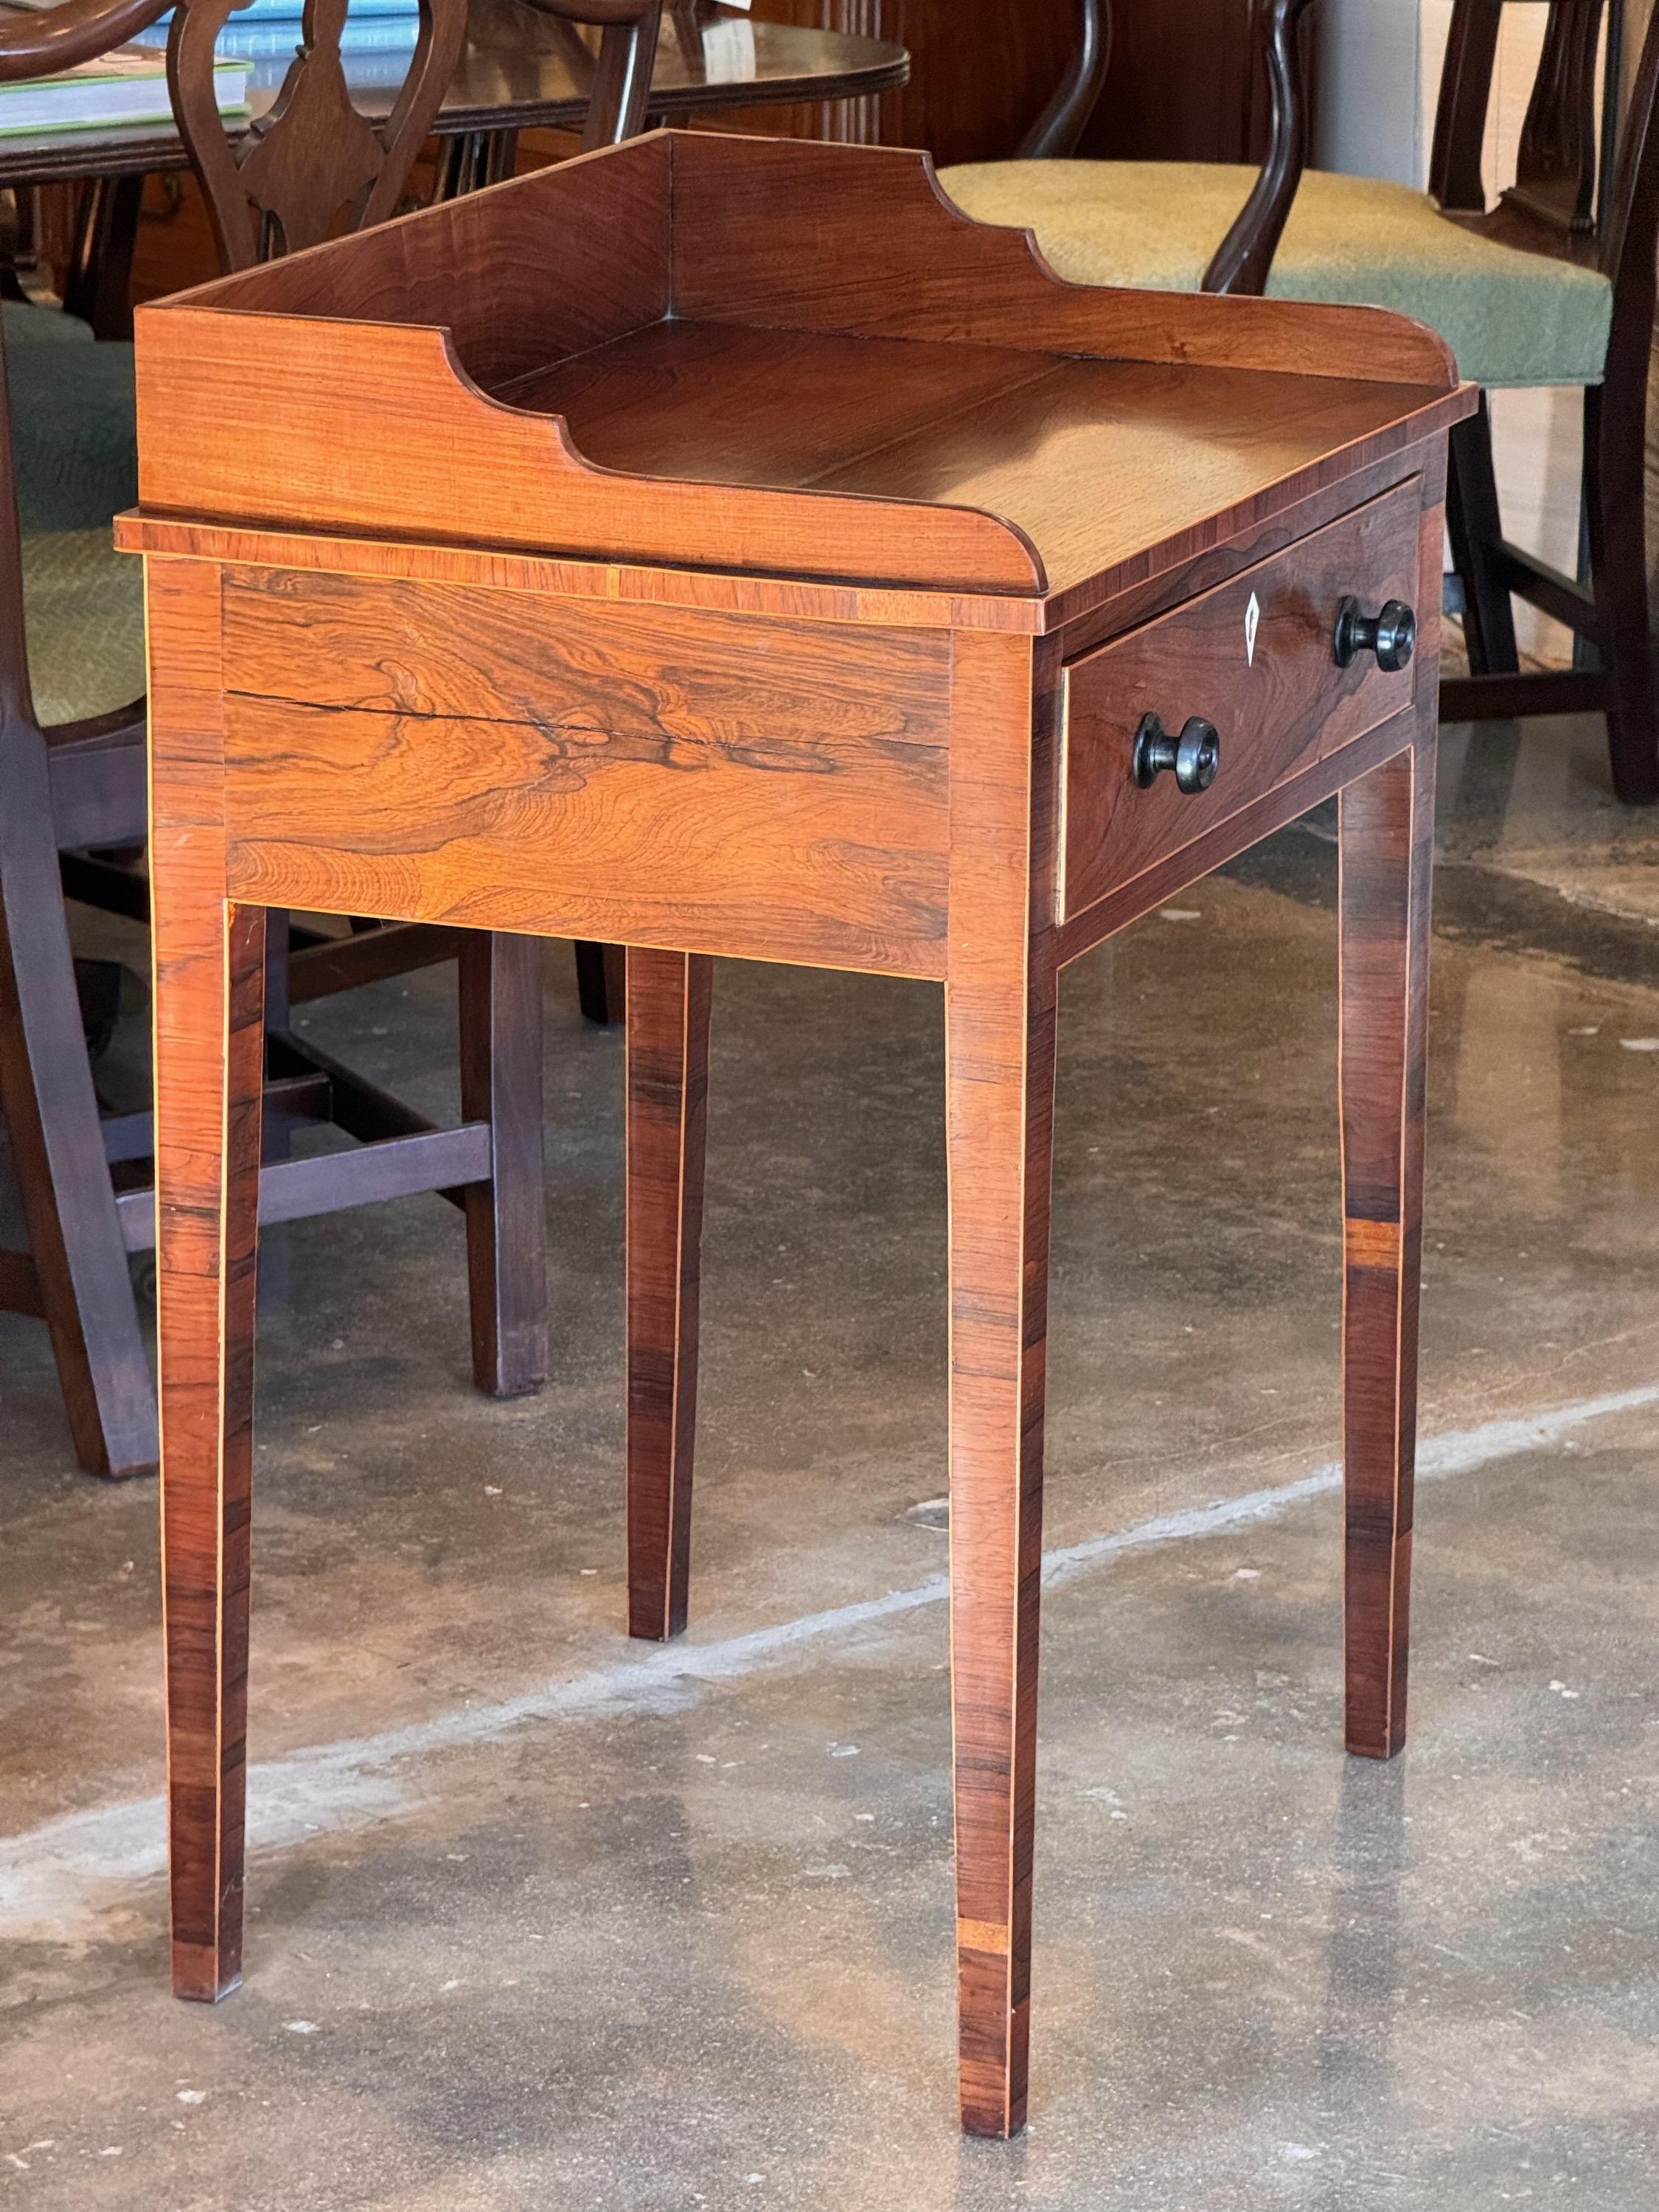 This sweet little writing table can also be a bedside table.